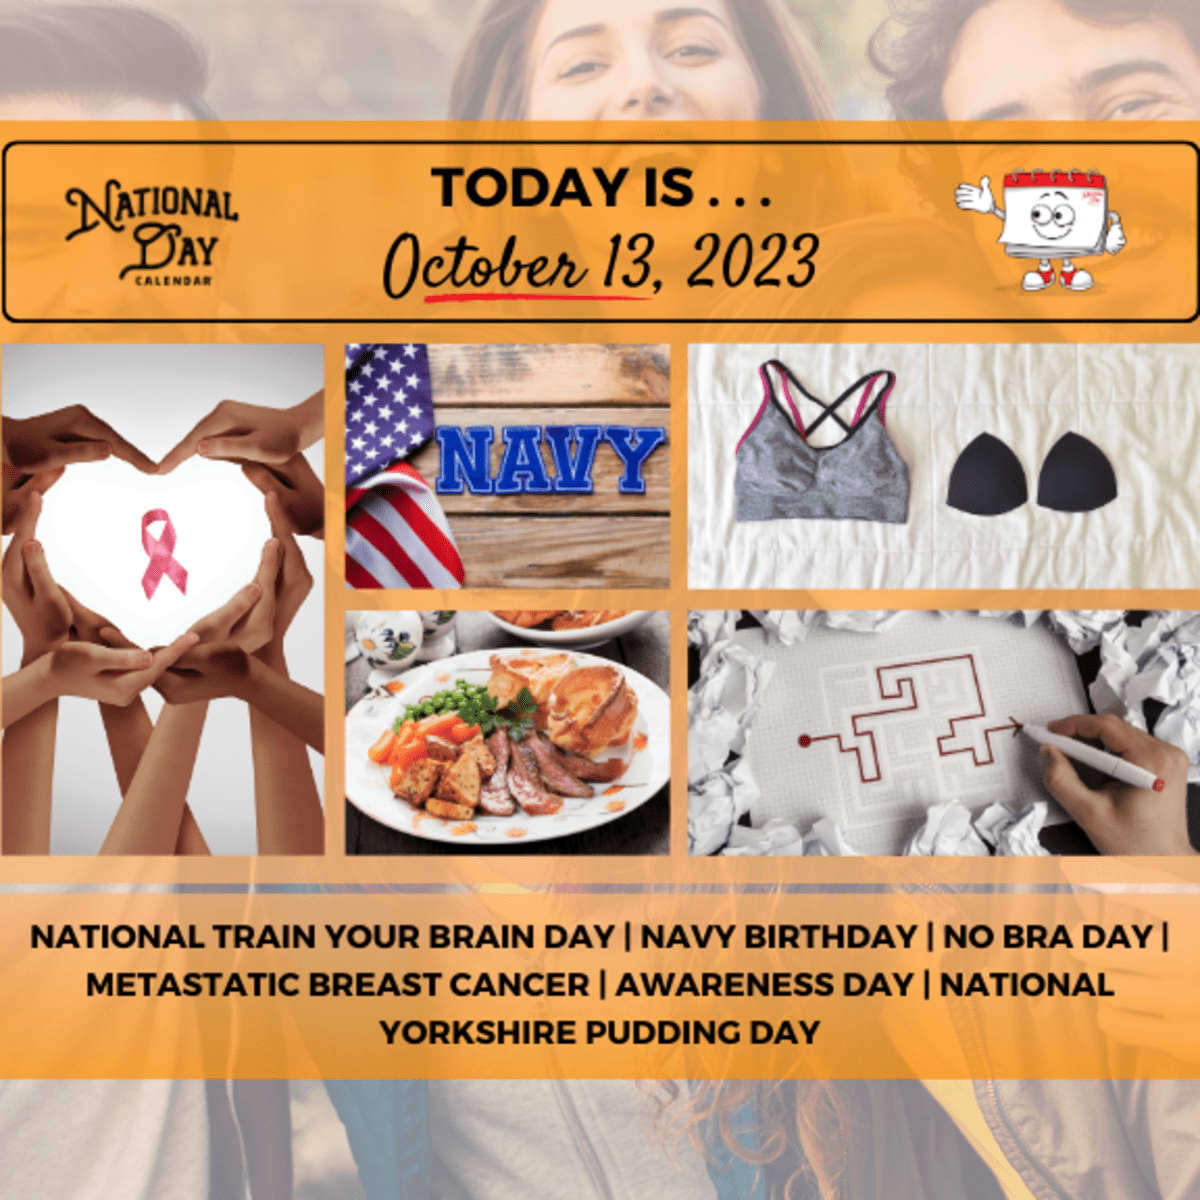 OCTOBER 13, 2023, NATIONAL TRAIN YOUR BRAIN DAY, NAVY BIRTHDAY, METASTATIC BREAST CANCER AWARENESS DAY, NATIONAL NO BRA DAY